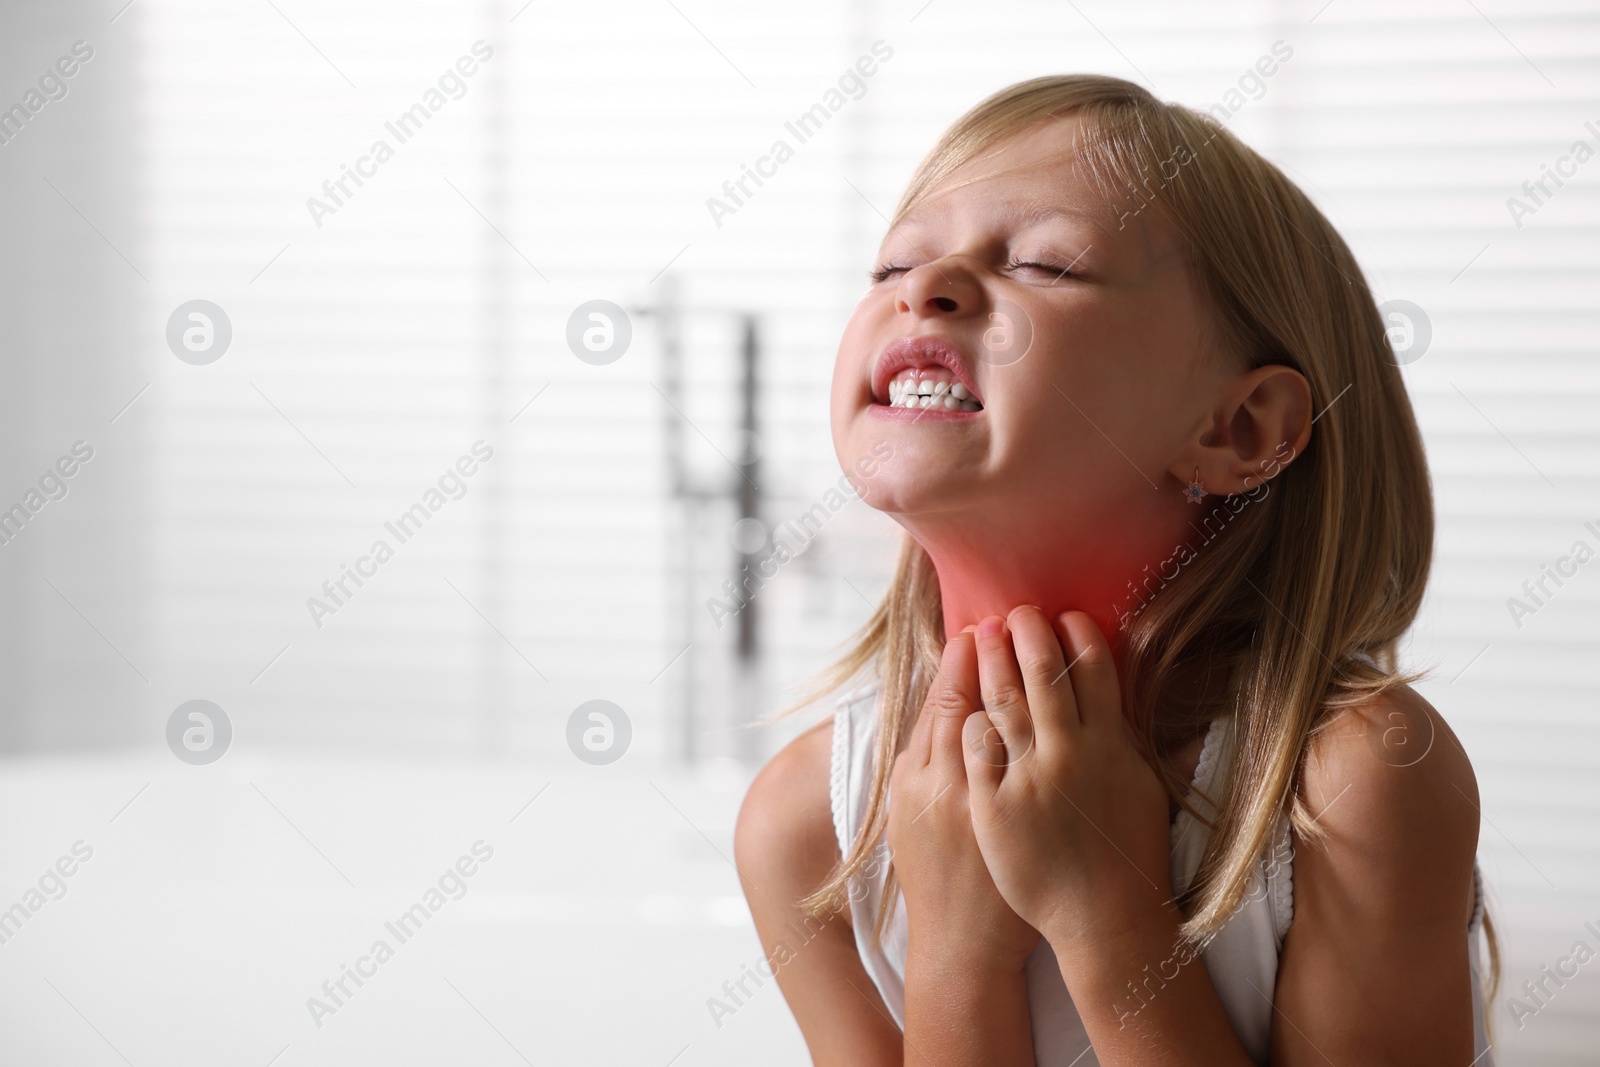 Photo of Suffering from allergy. Little girl scratching her neck indoors, space for text